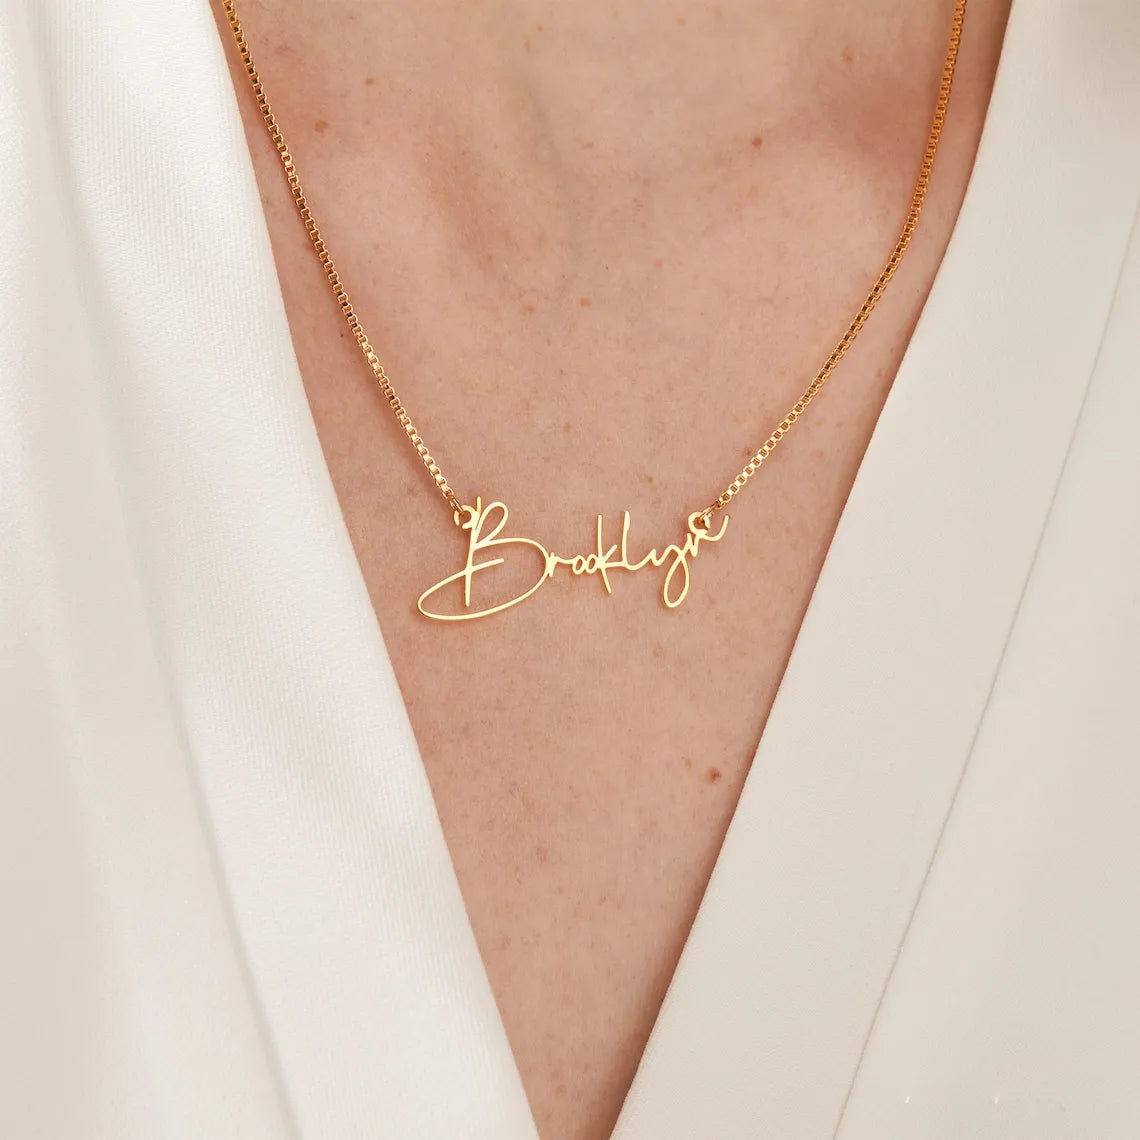 Exquisite 18K Rose Gold Plated - Personalized Name Necklace